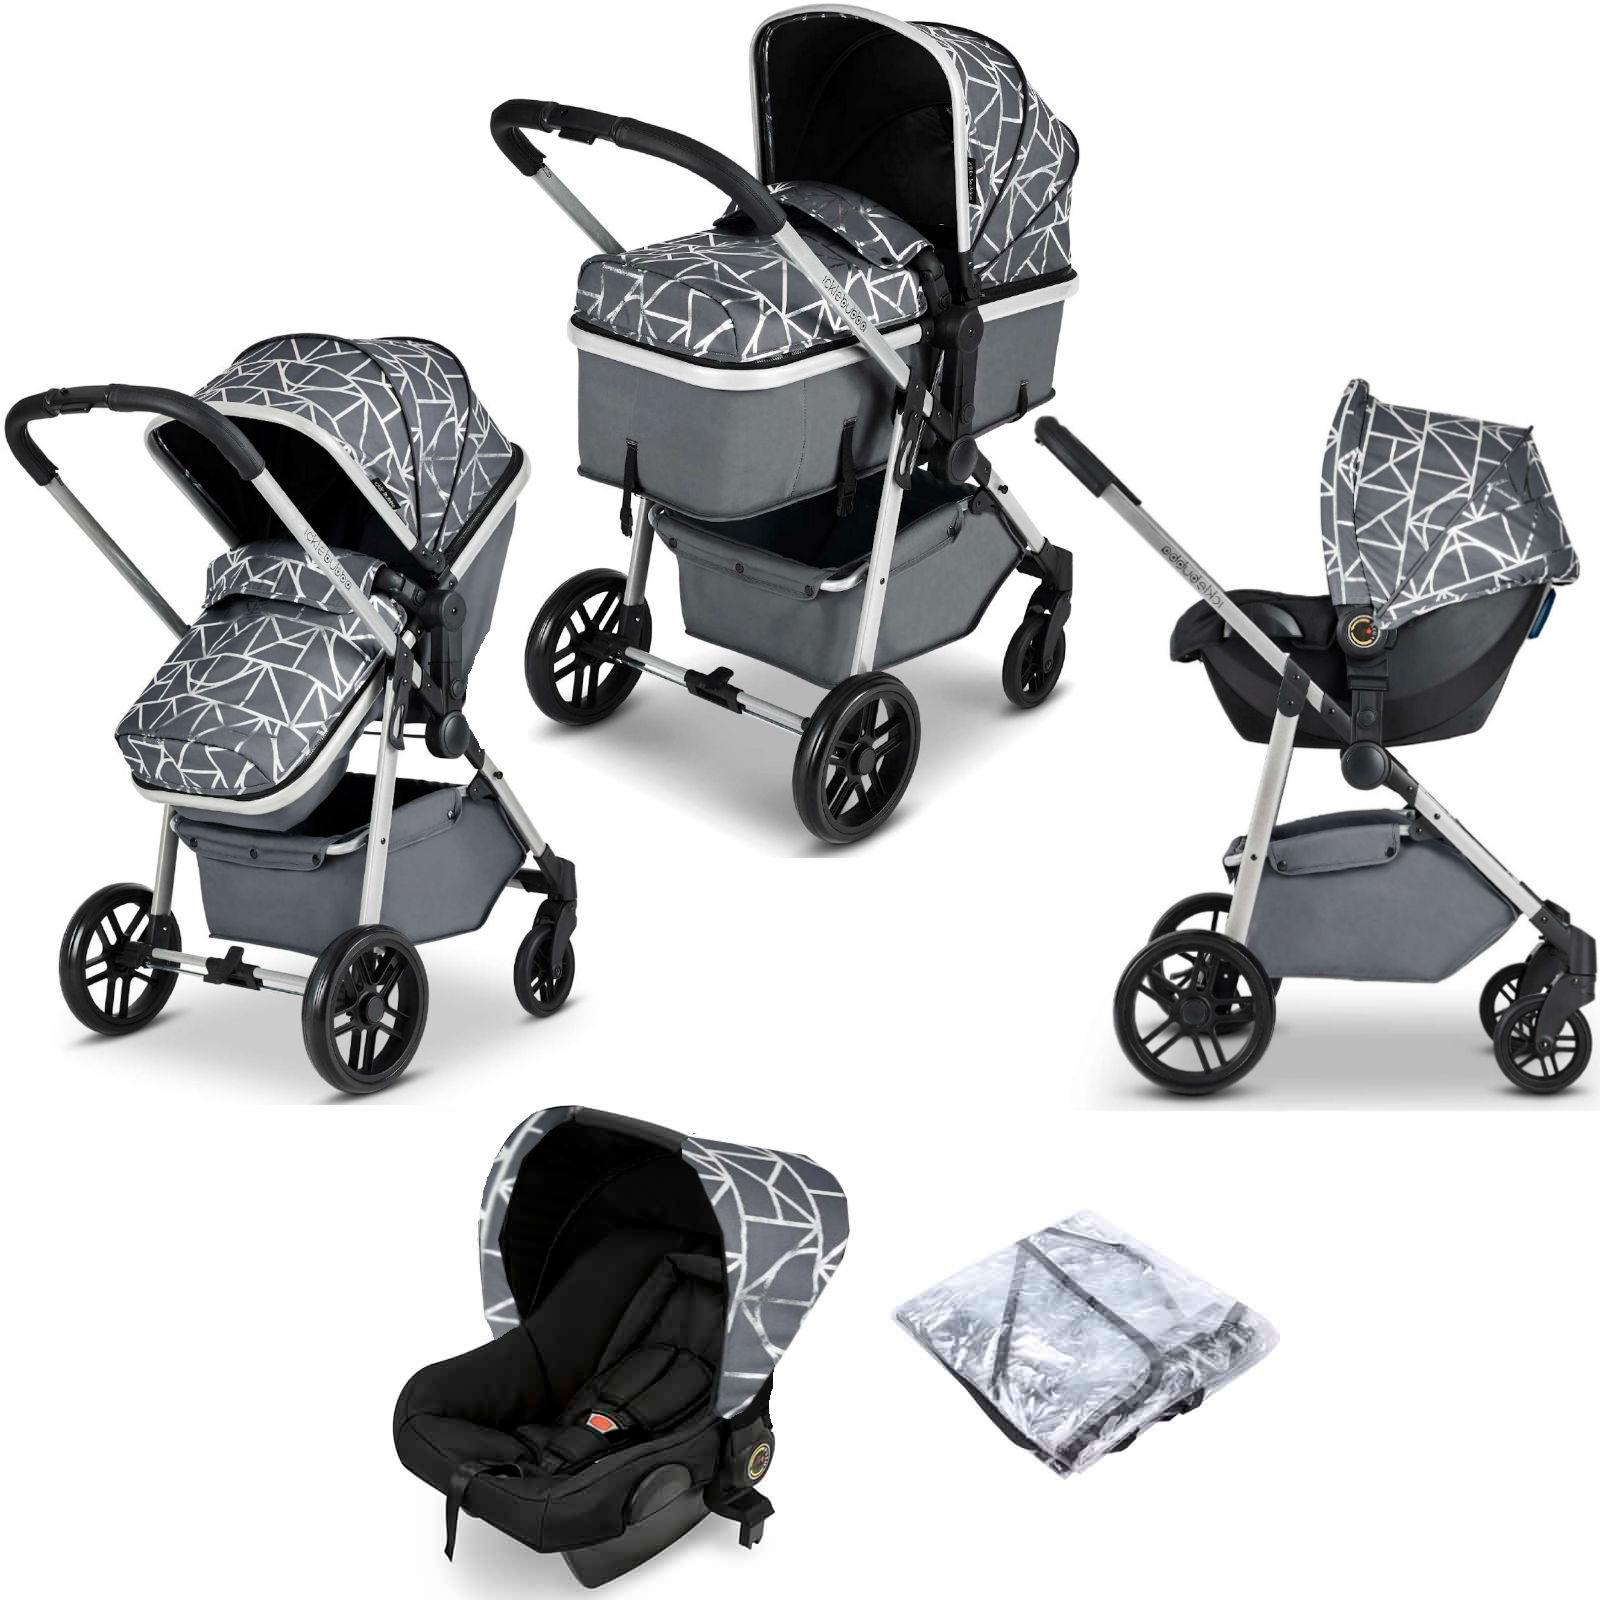 Ickle Bubba Moon 3 in 1 (Silver Chassis) Travel System - Sparkle